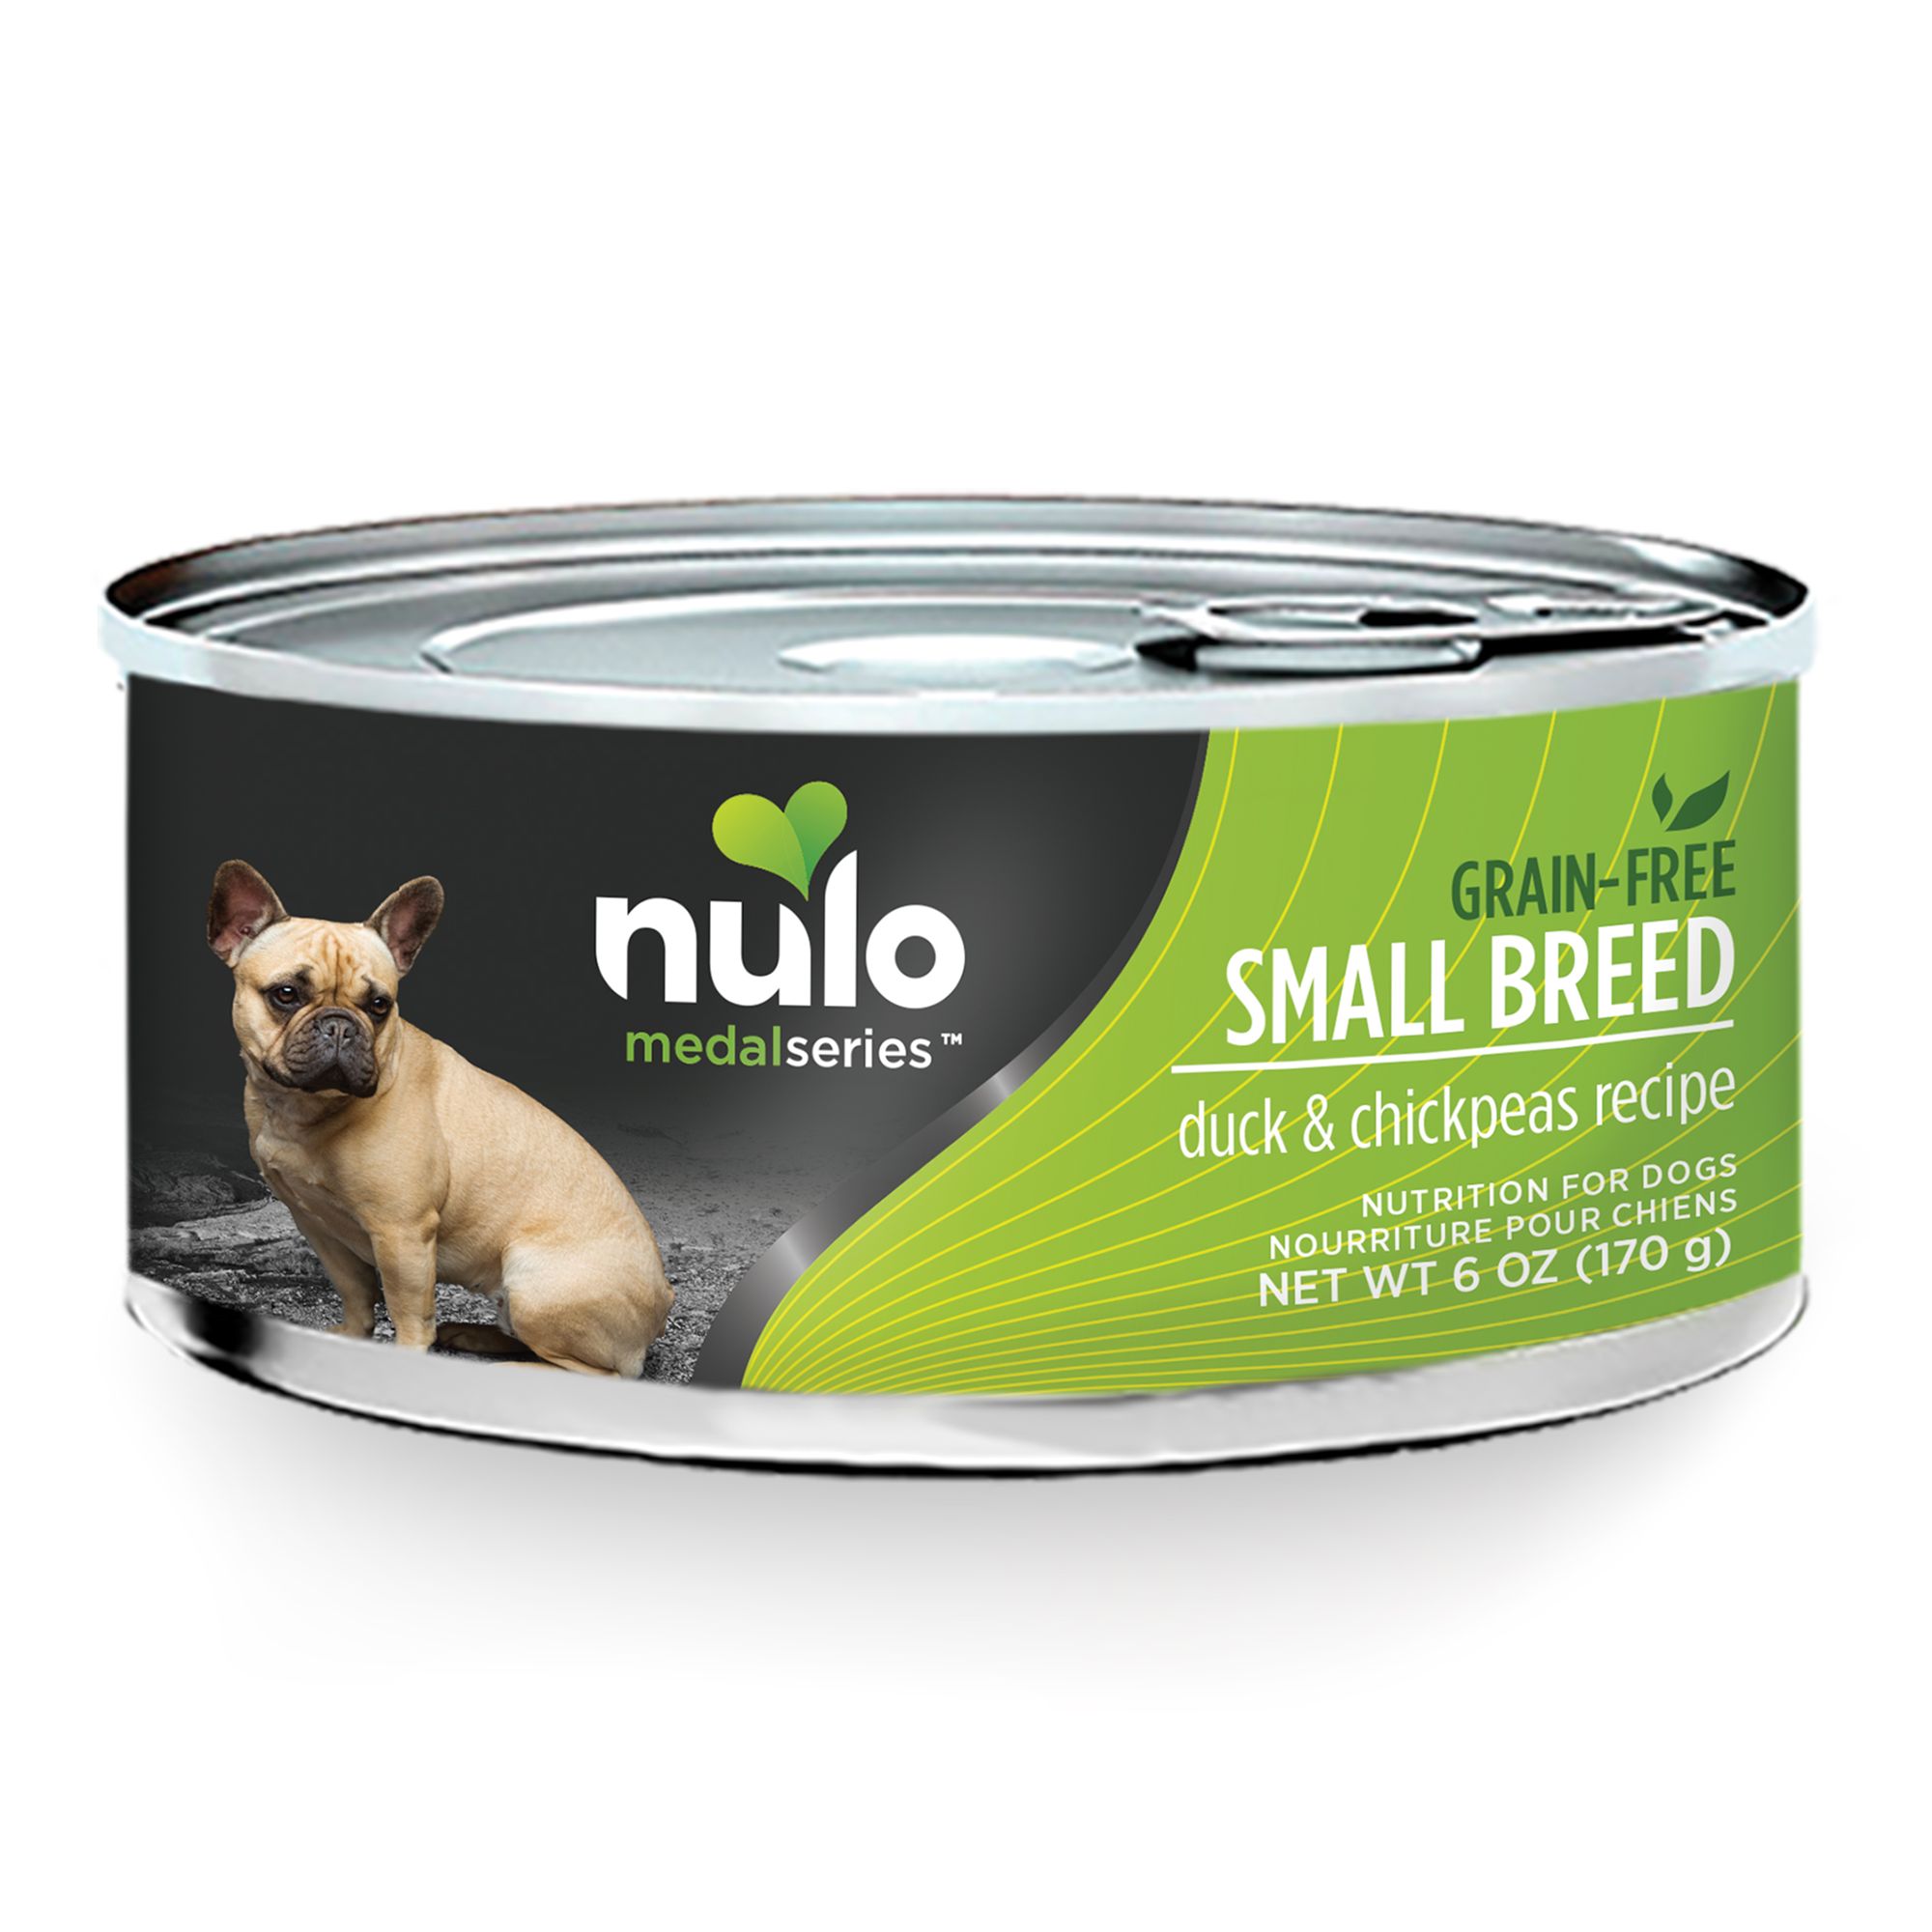 nulo medal series small breed